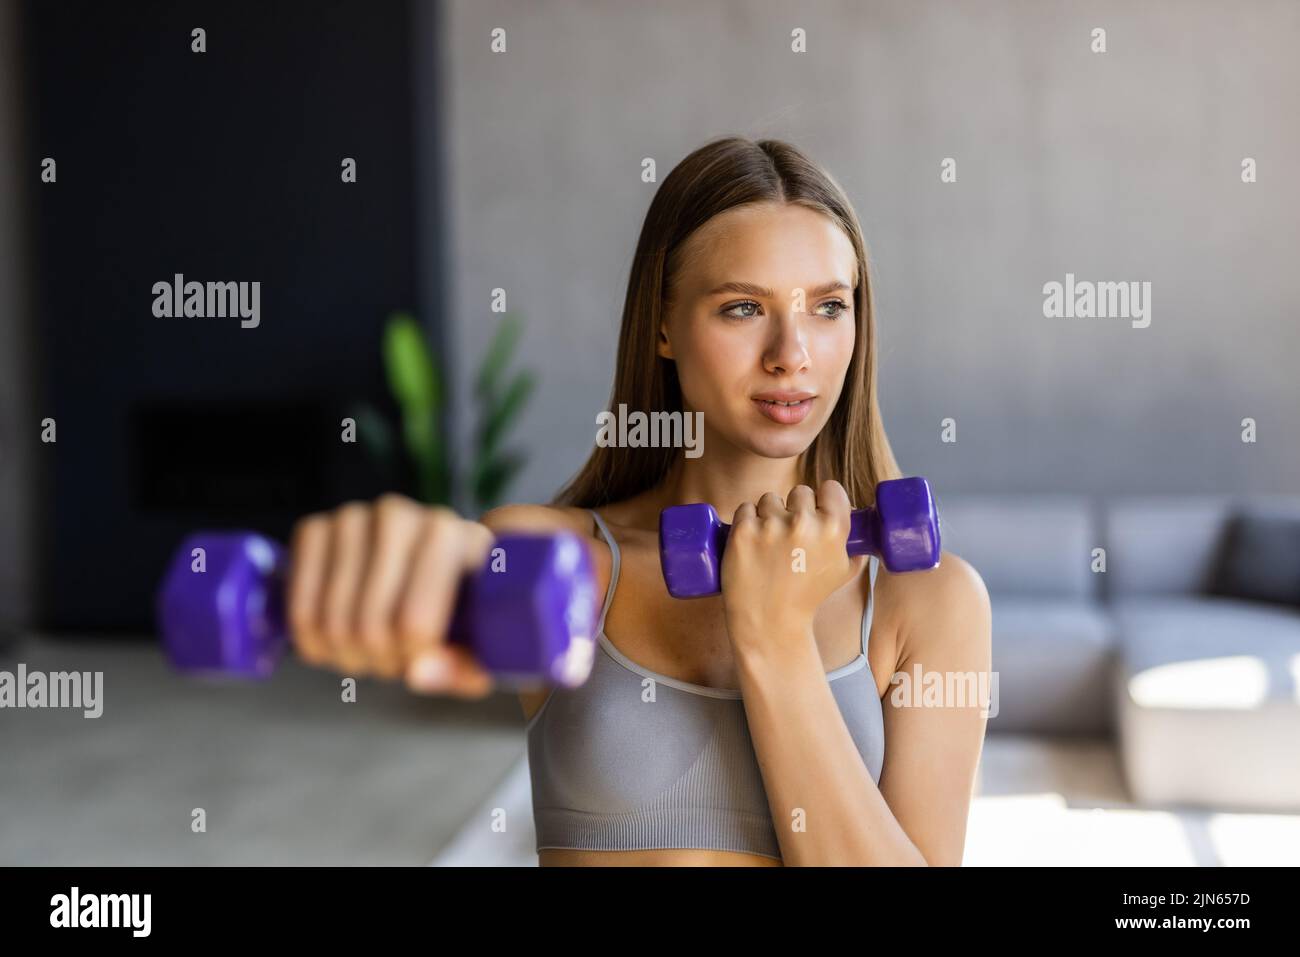 Fitness at home concept. Smiling young woman on mat with sports equipment at home. Stock Photo